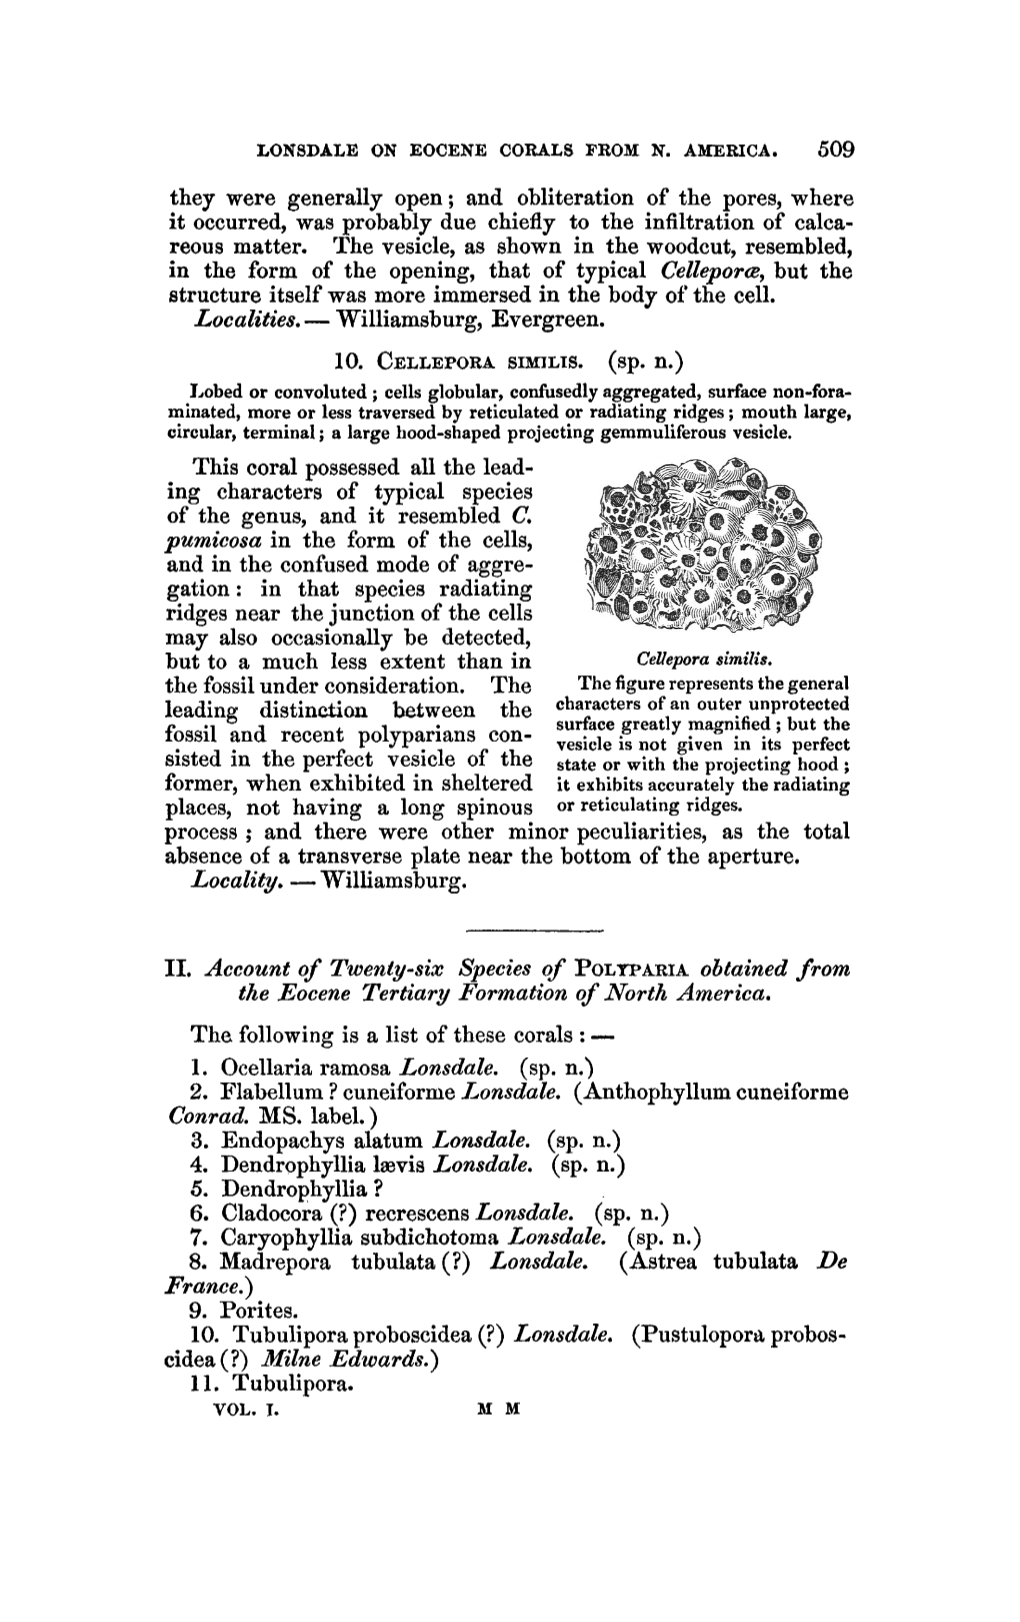 Account of Twenty-Six Species of Polyparia Obtained from the Eocene